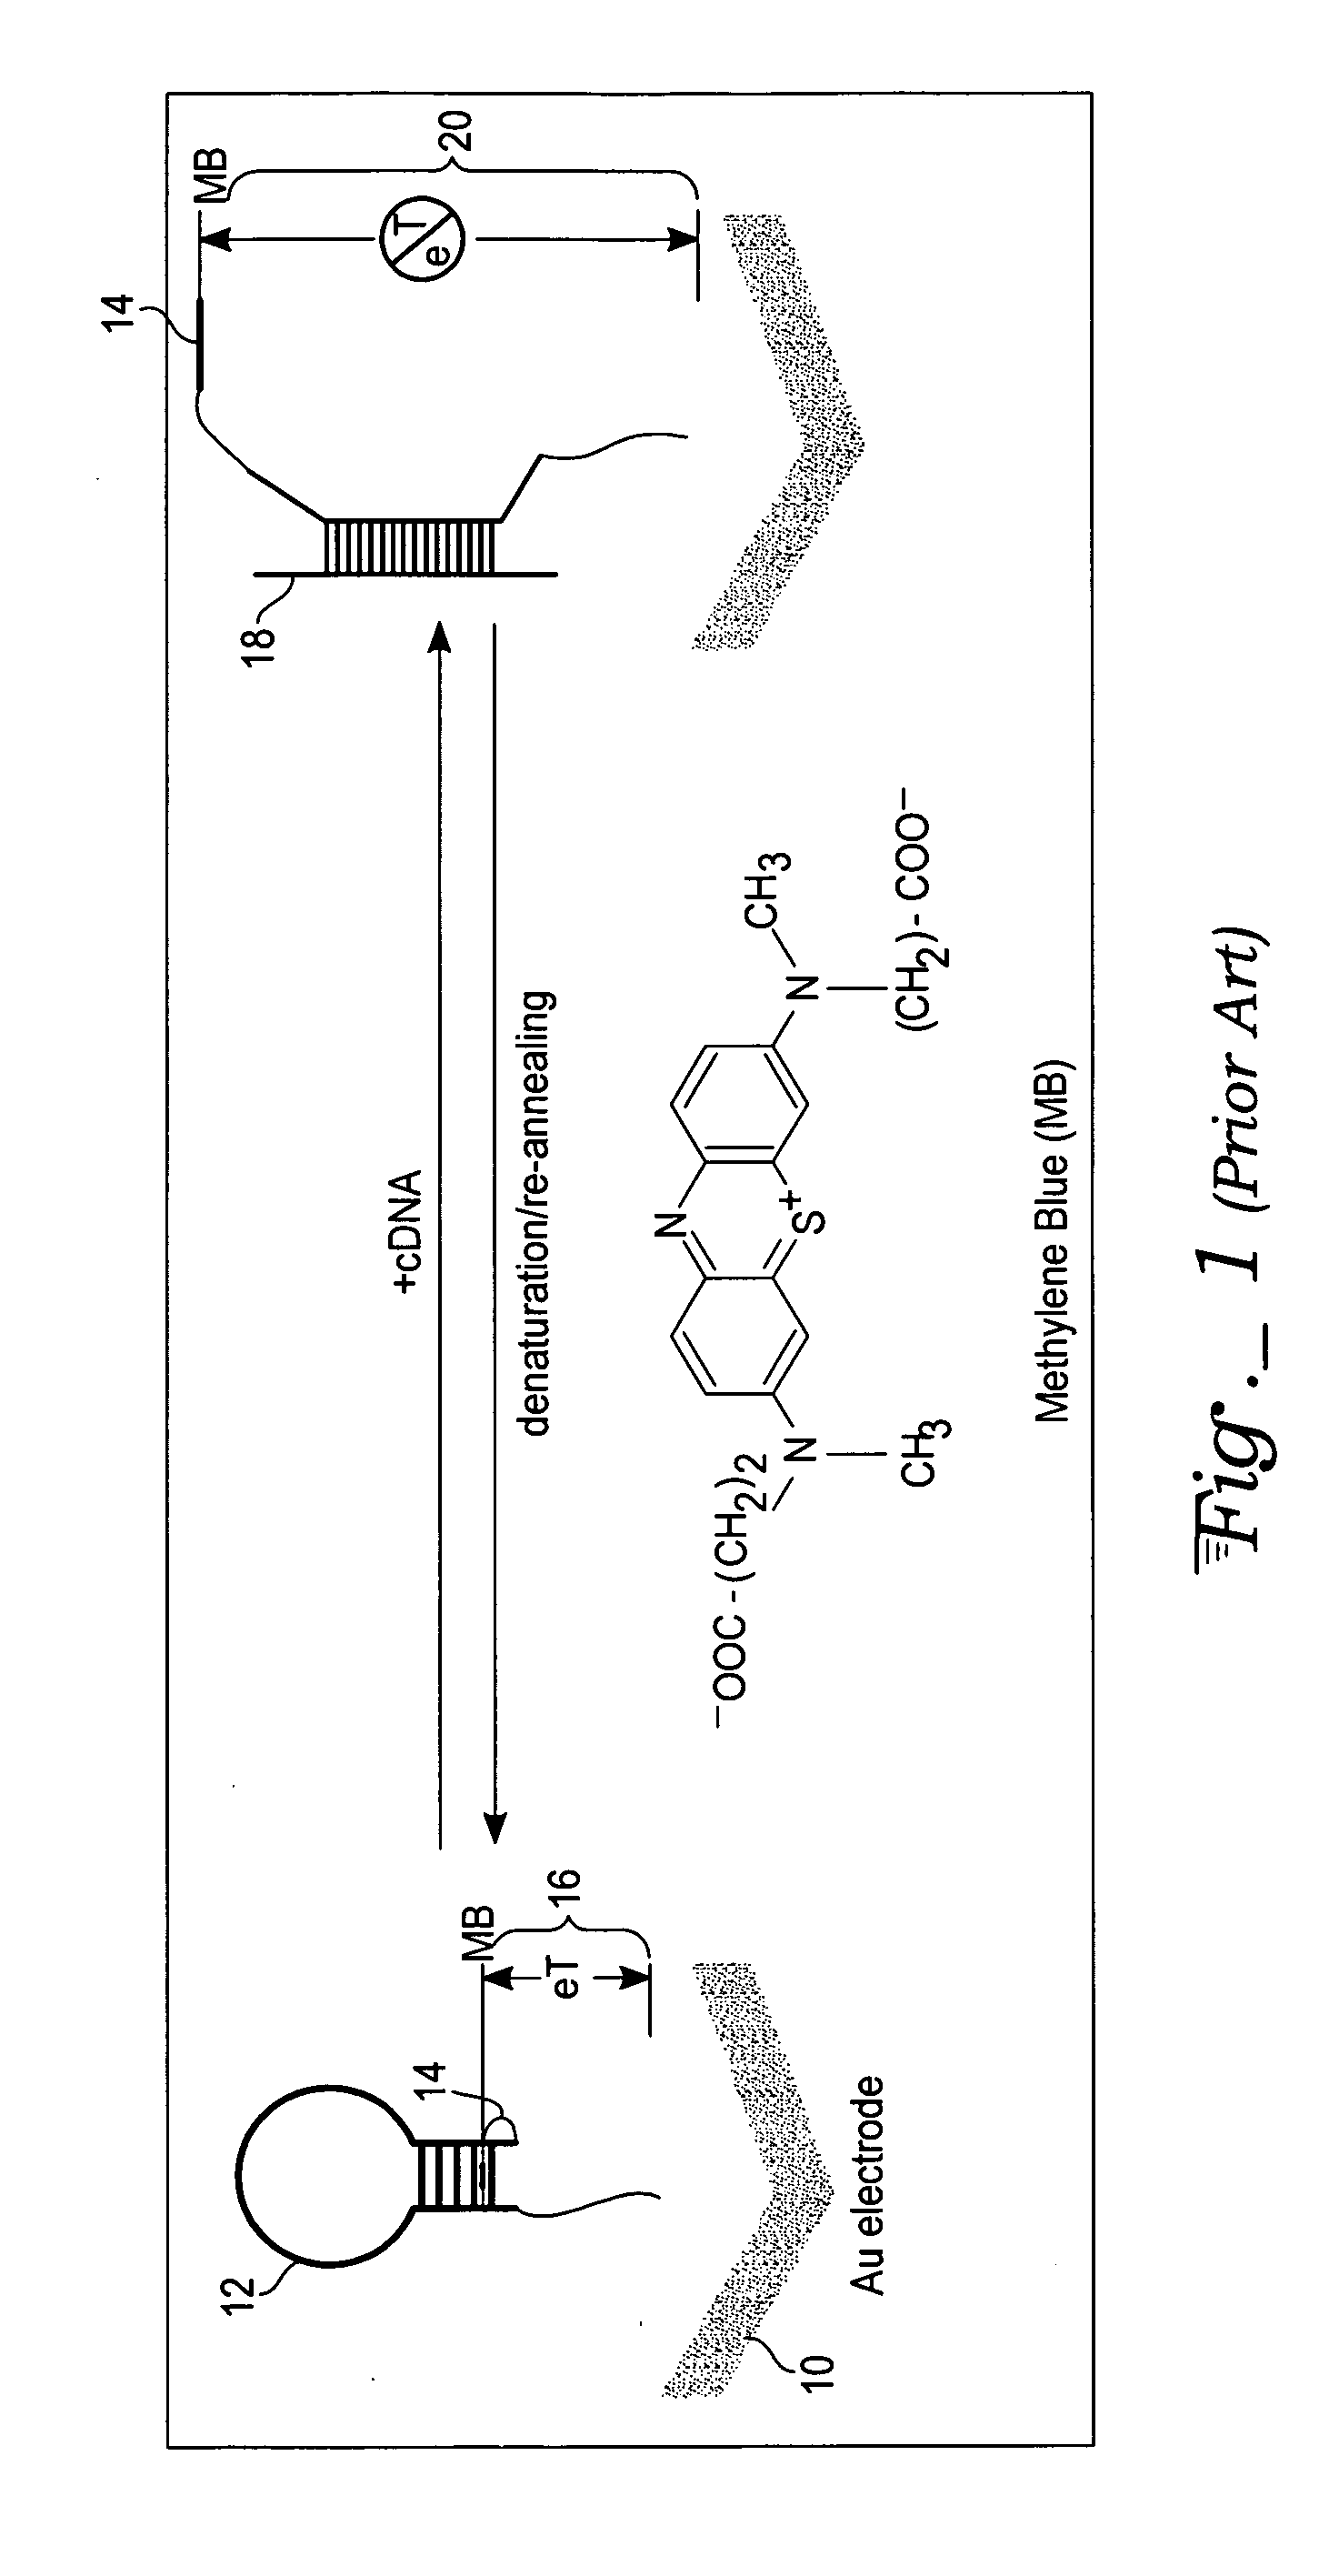 Method, apparatus, and system for authentication using labels containing nucleotide sequences